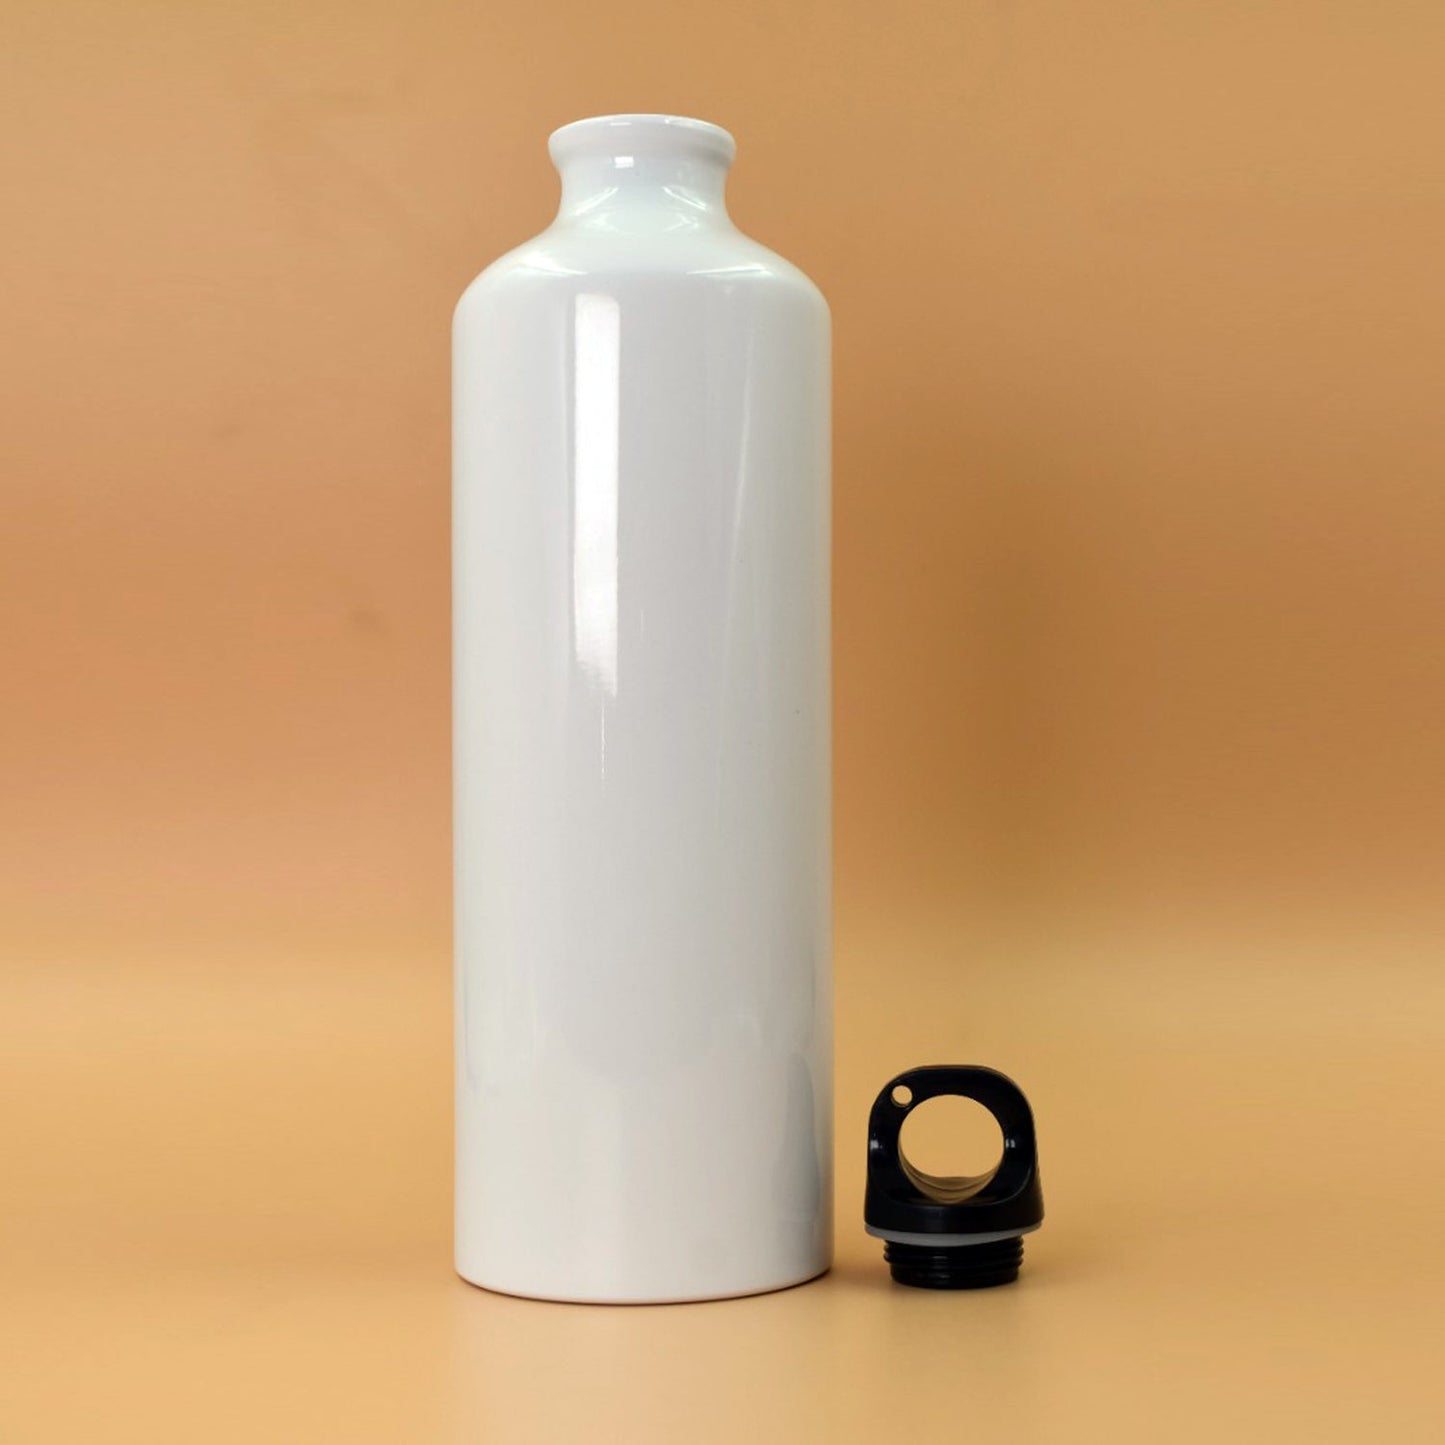 6083 CNB Bottle no.2 used in all kinds of places like household and official for storing and drinking water and some beverages etc. 